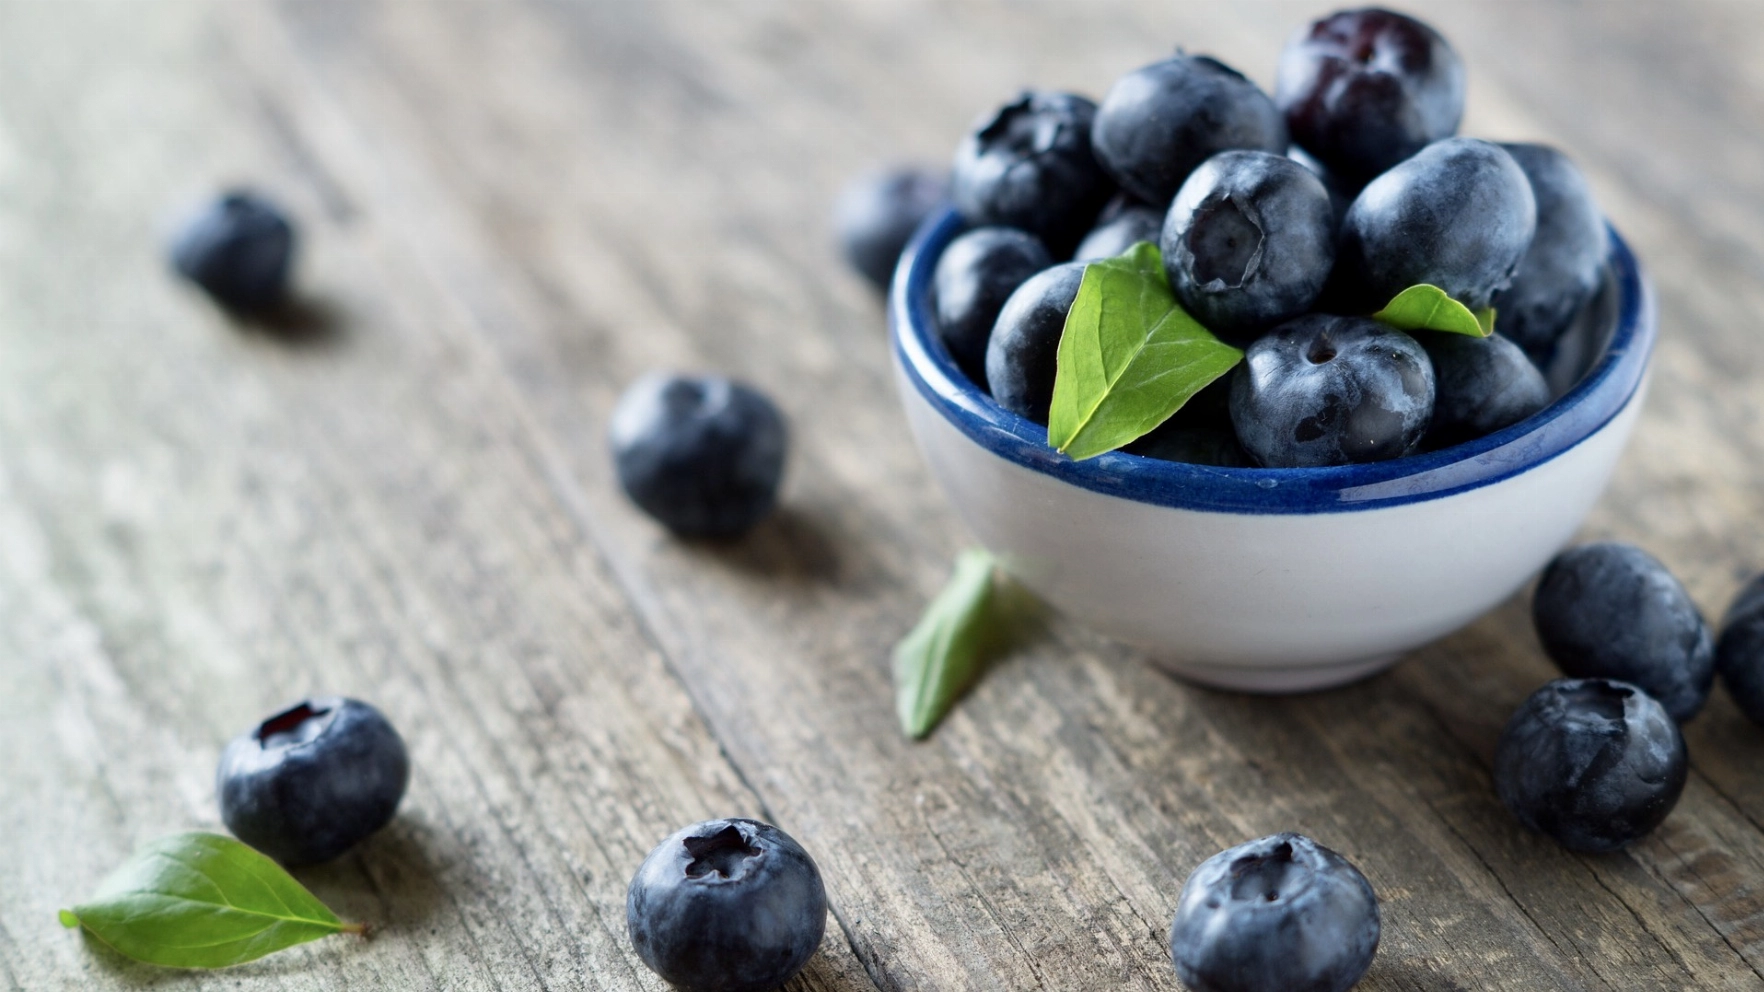 Blueberries: Why They Should Be A Must-Have Fruit?